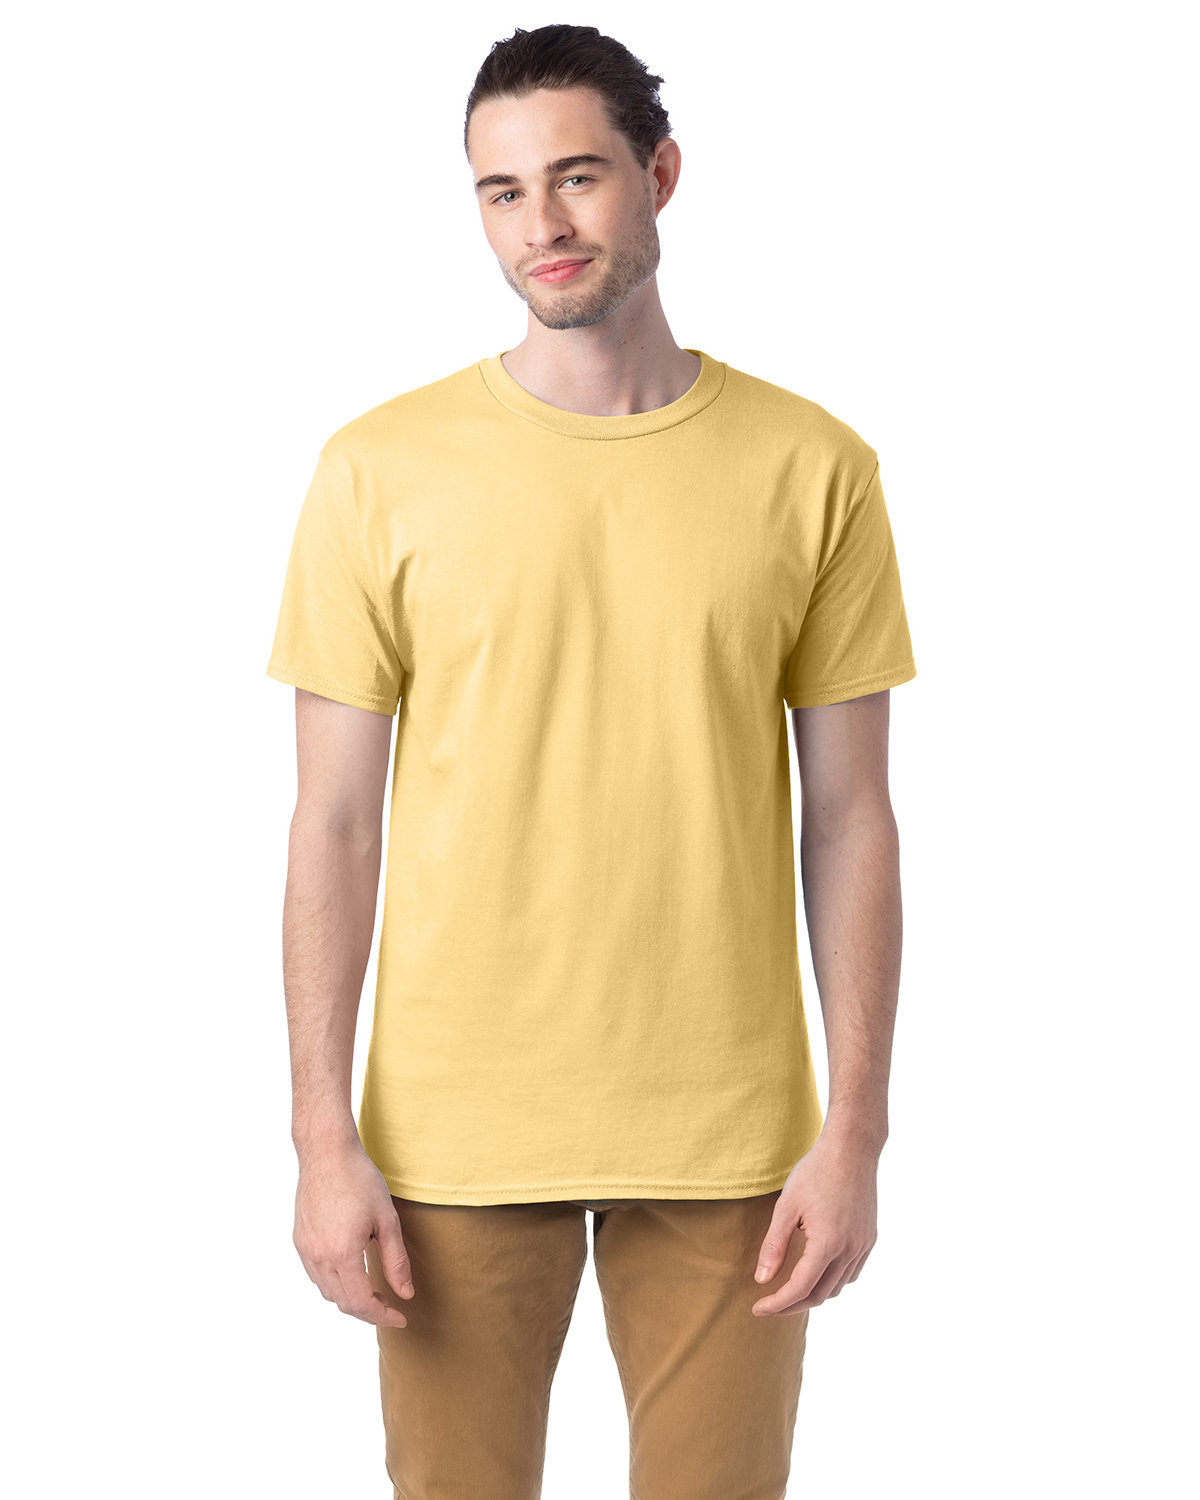 Hanes Adult Essential-T T-Shirt ATHLETIC GOLD 